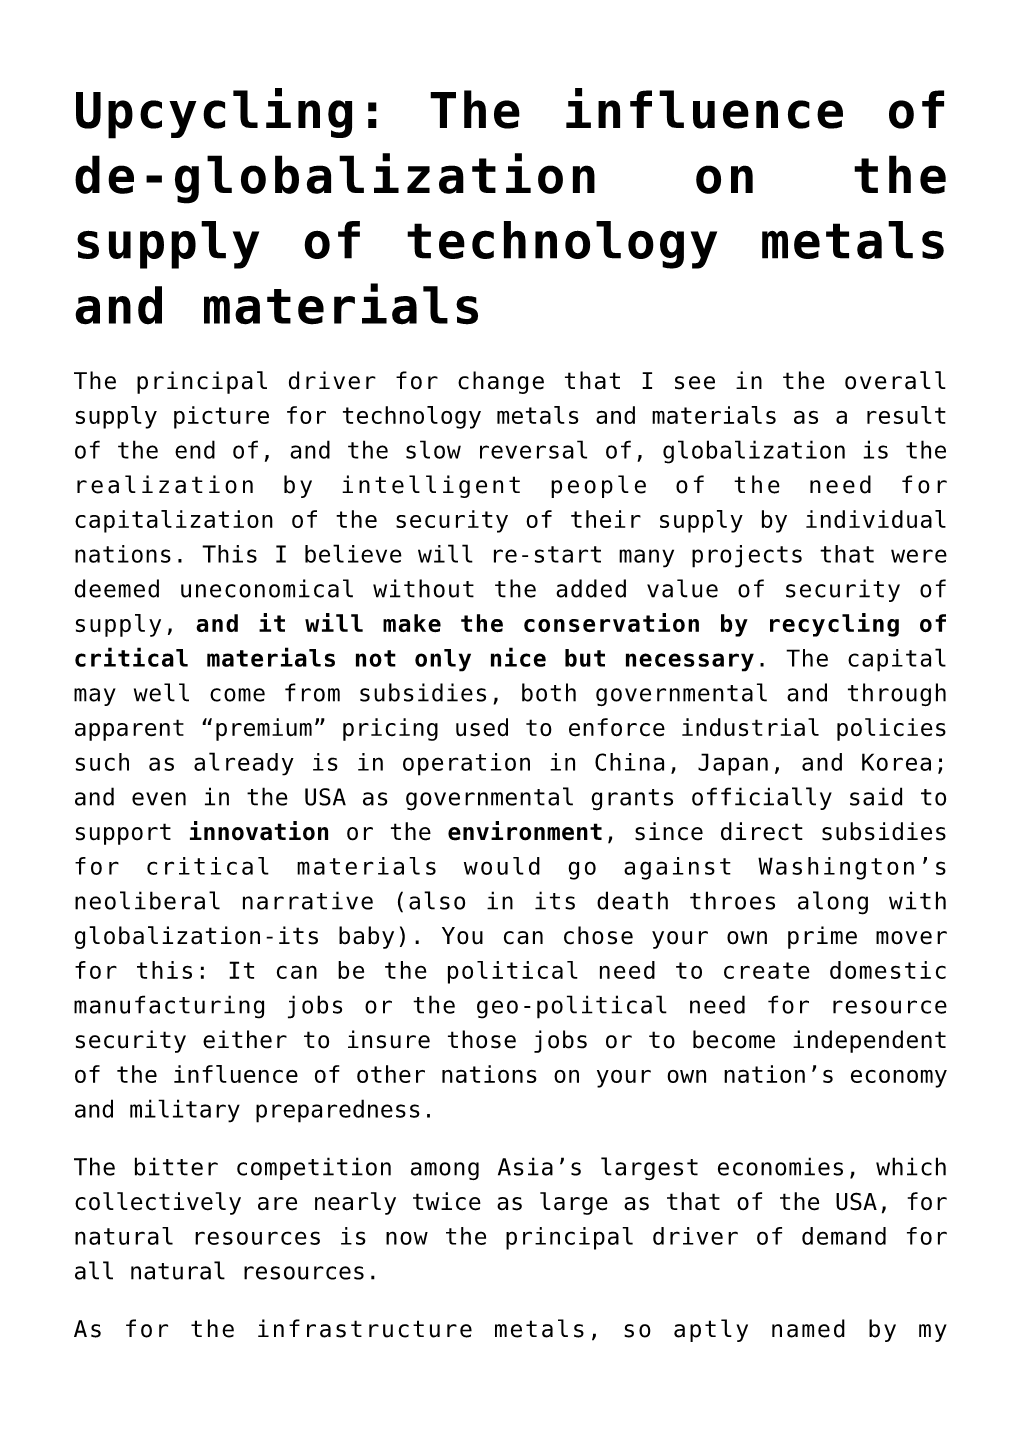 Upcycling: the Influence of De-Globalization on the Supply of Technology Metals and Materials